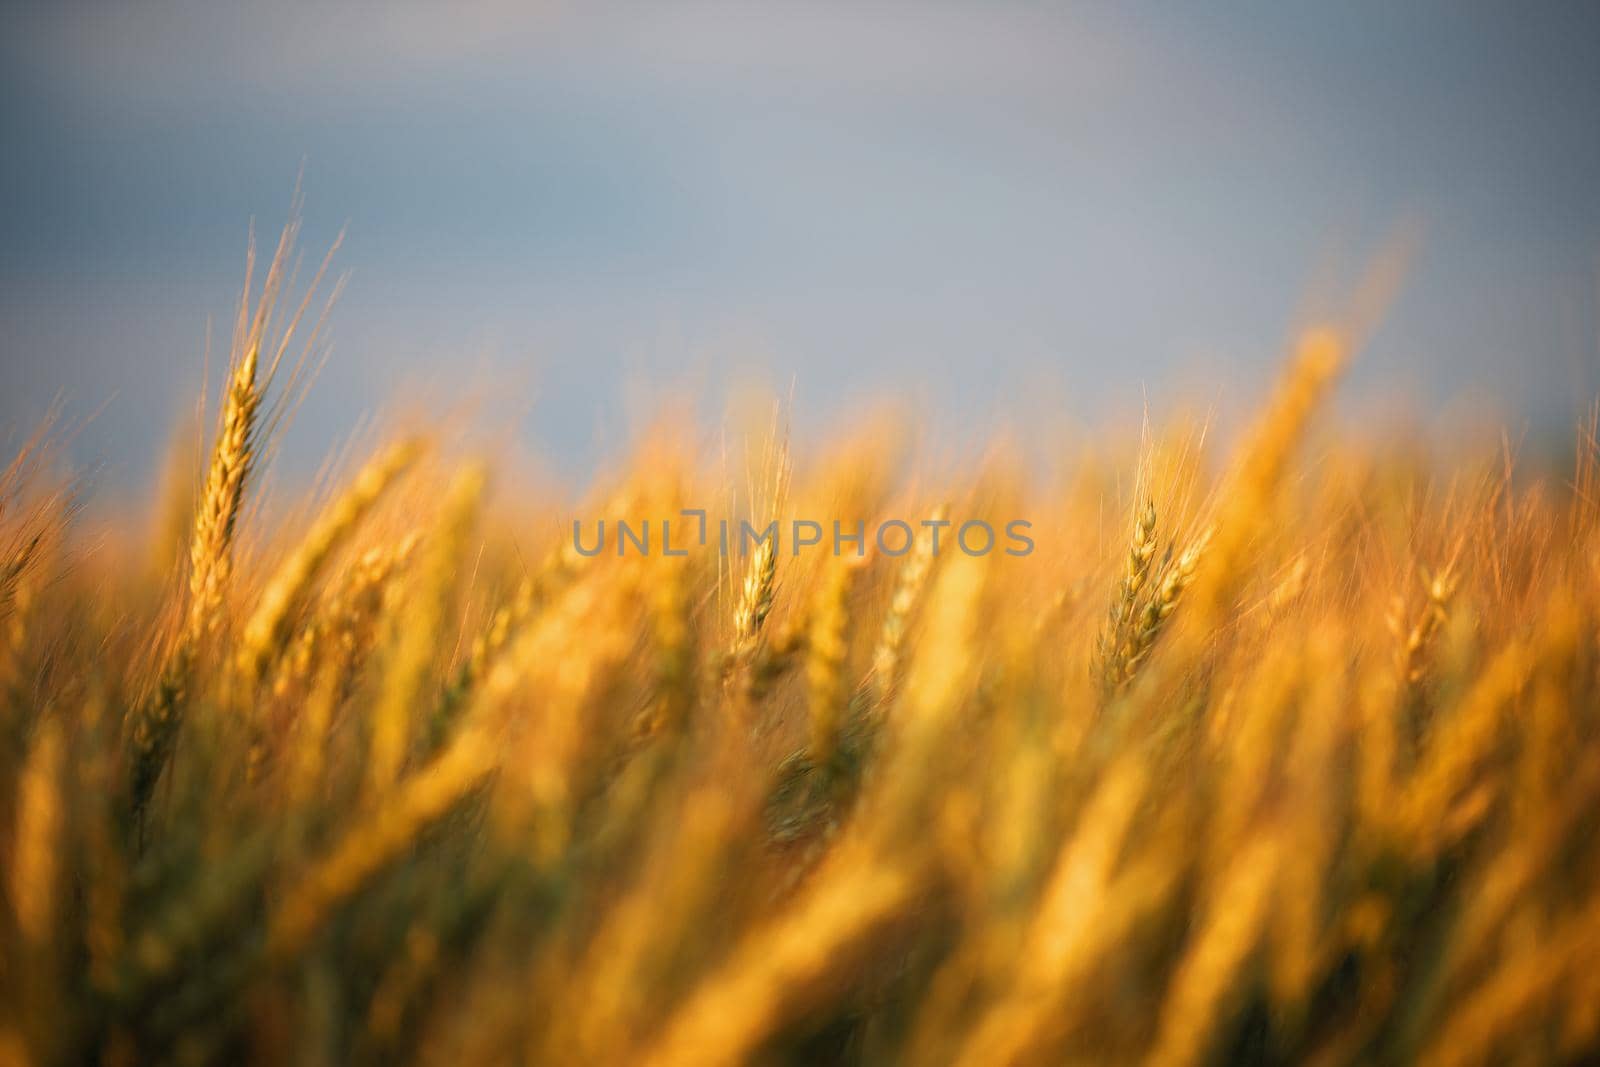 Wheat ears in the field, food background. Ears of wheat ripen in the field. Wheat field, agriculture, agricultural background. Ecological clean food, food safety.